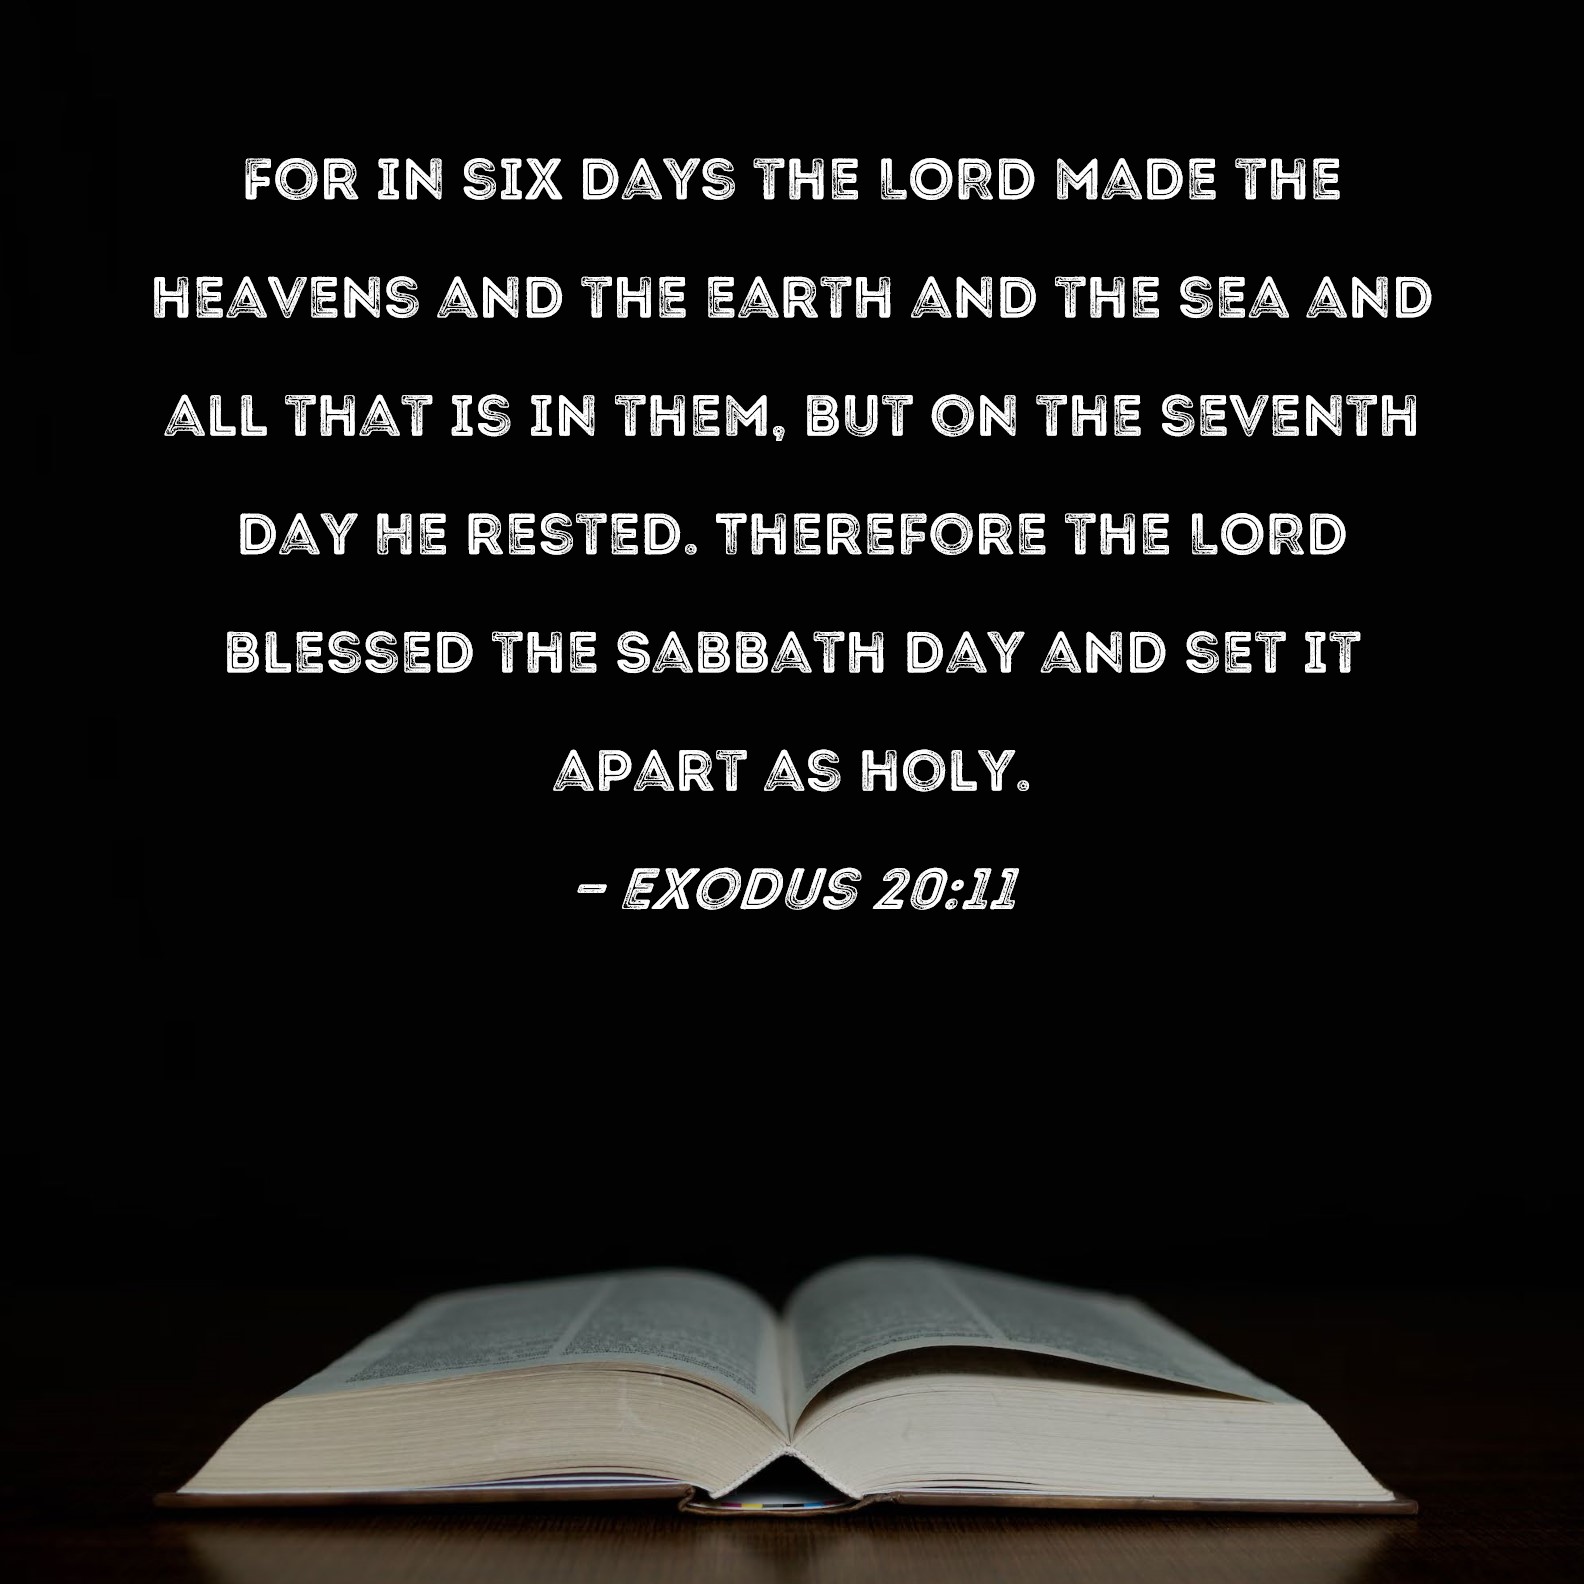 exodus-20-11-for-in-six-days-the-lord-made-the-heavens-and-the-earth